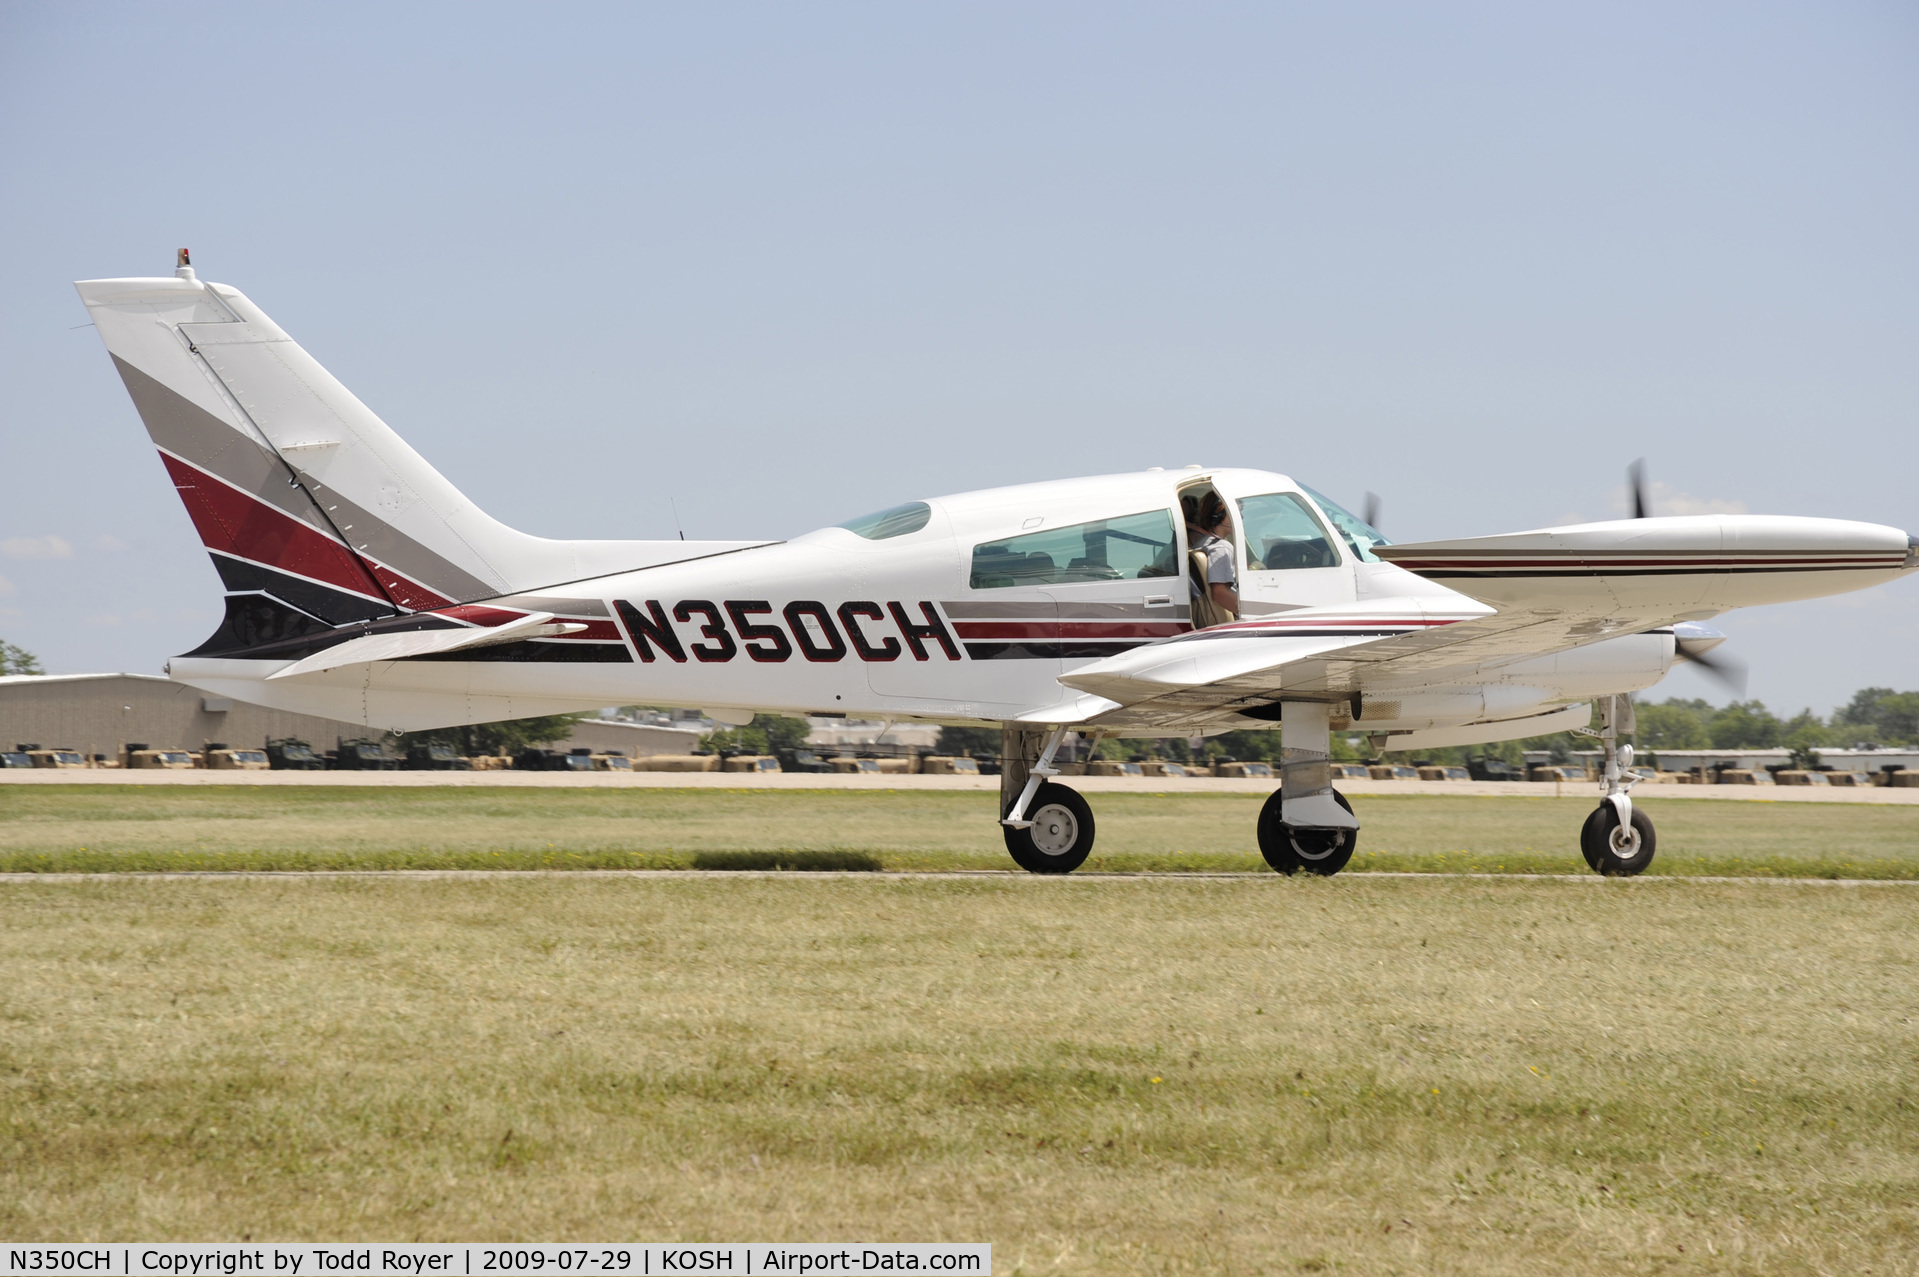 N350CH, 1973 Cessna 310Q C/N 310Q0910, Taxi for departure